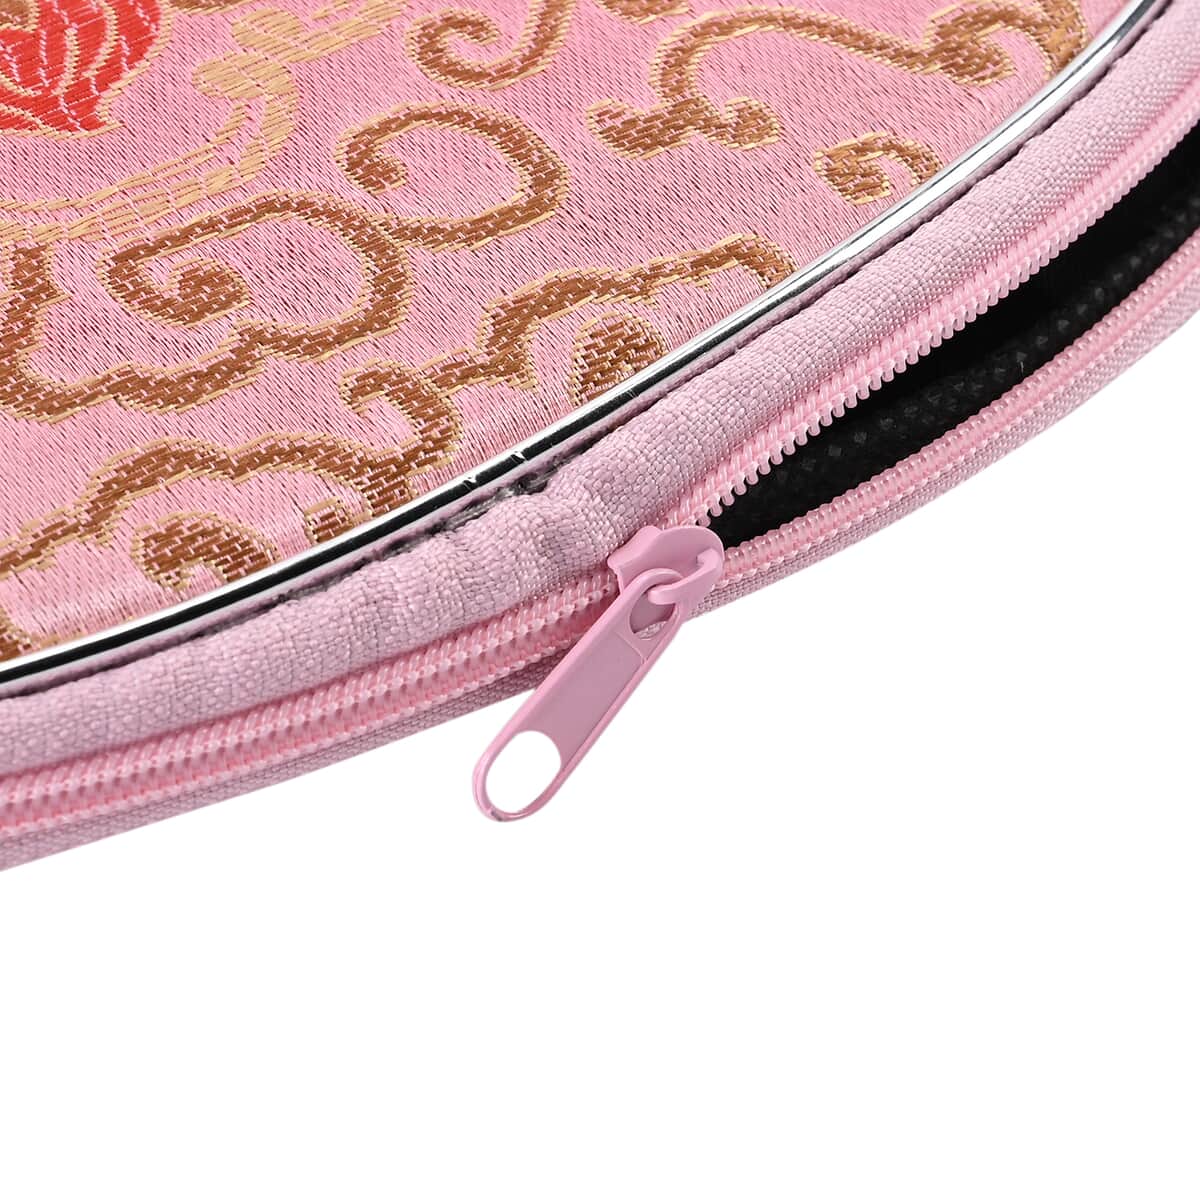 Set of 10 Pink Multi-Purpose Jewelry Bag with Zipper (8.7"x5.7", 6.9"x4.7", 5.5"x3.9", 4.3"x3.5", 3.5"x2.9") image number 5